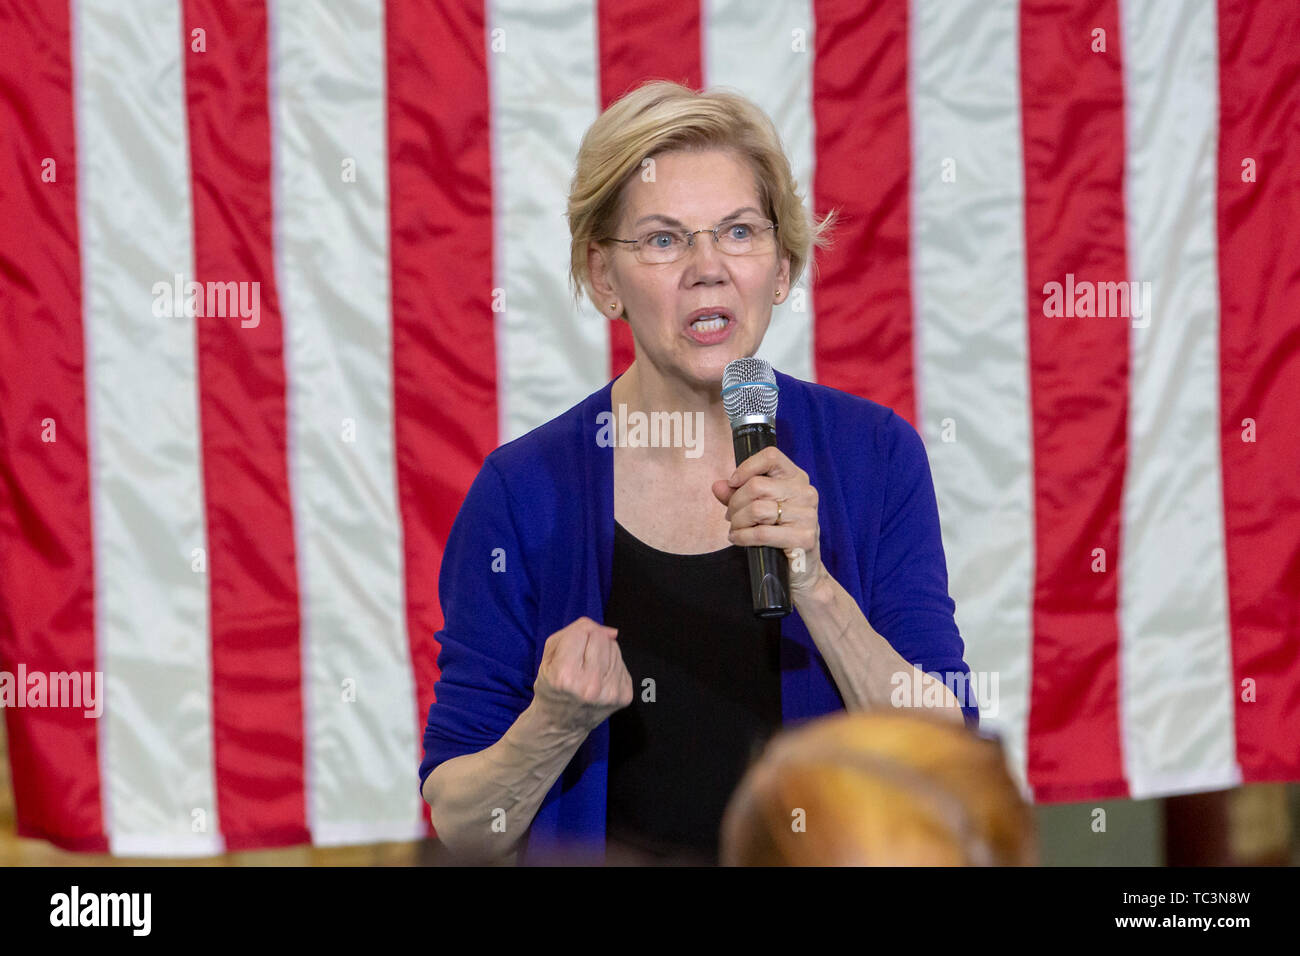 Detroit, Michigan - Senator Elizabeth Warren holds a 'community conversation' in Detroit as part of her campaign for the 2020 Democratic presidential  Stock Photo